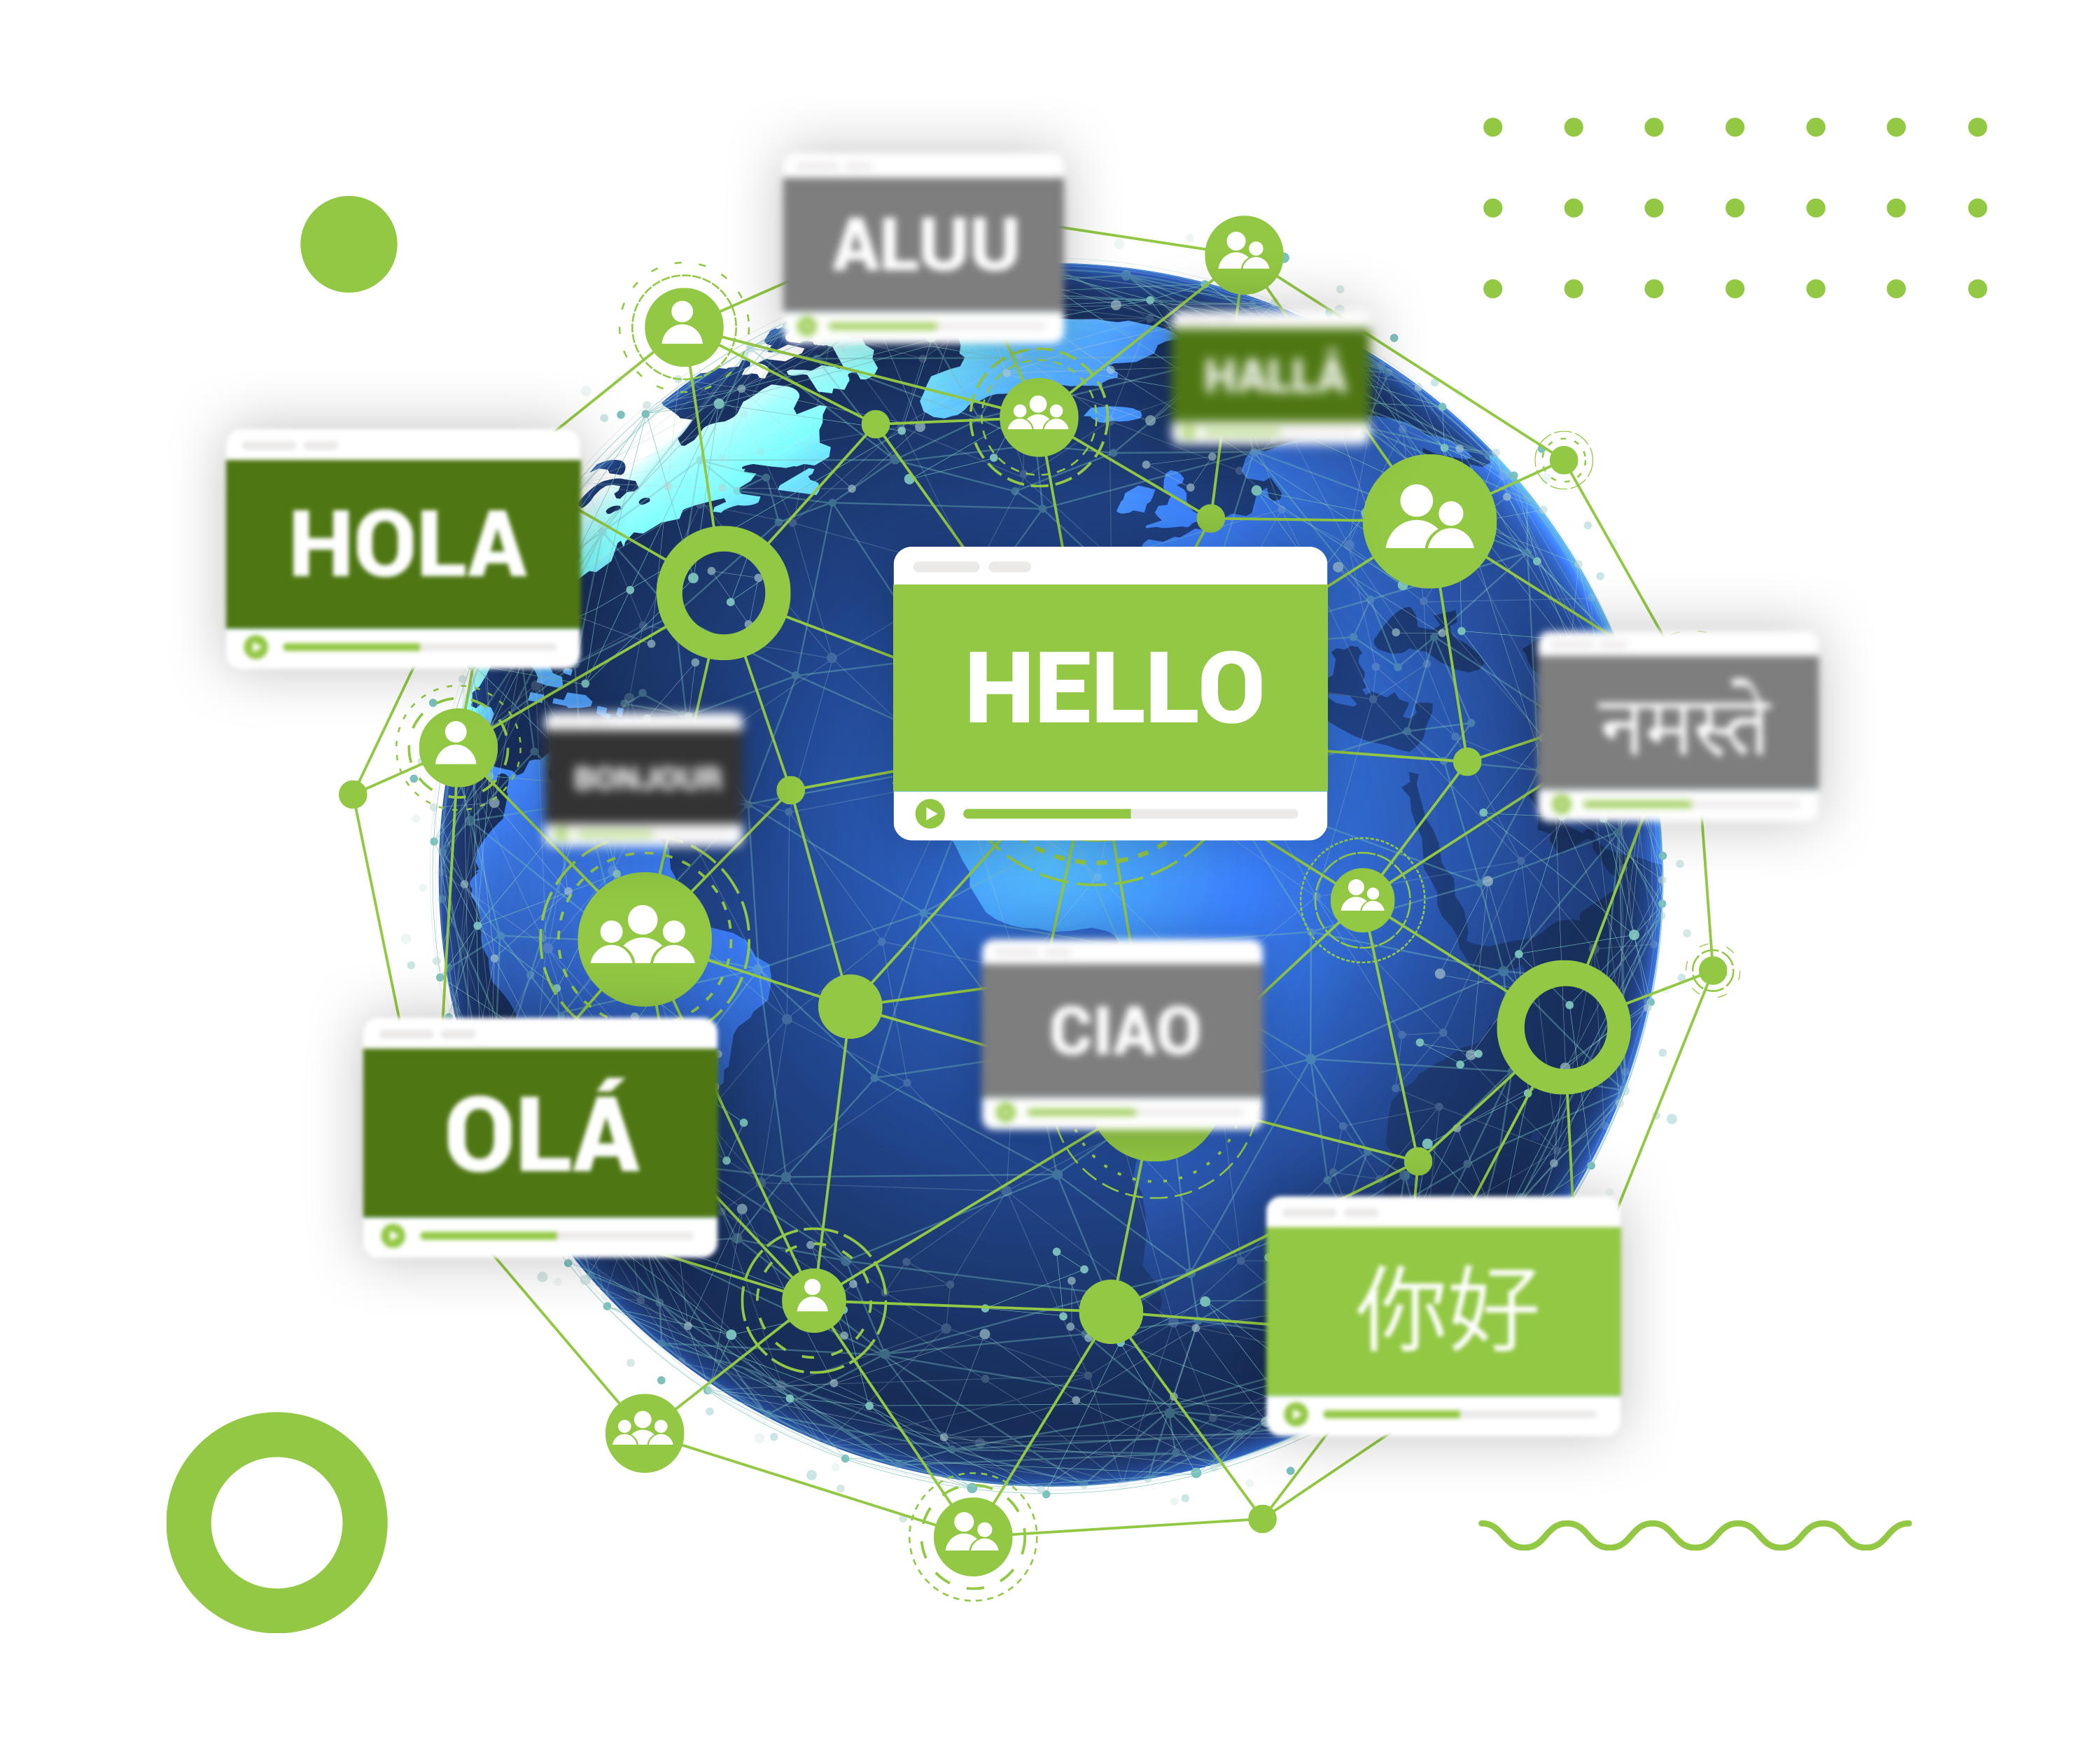 A globe surrounded with video icons showing multip0le languages